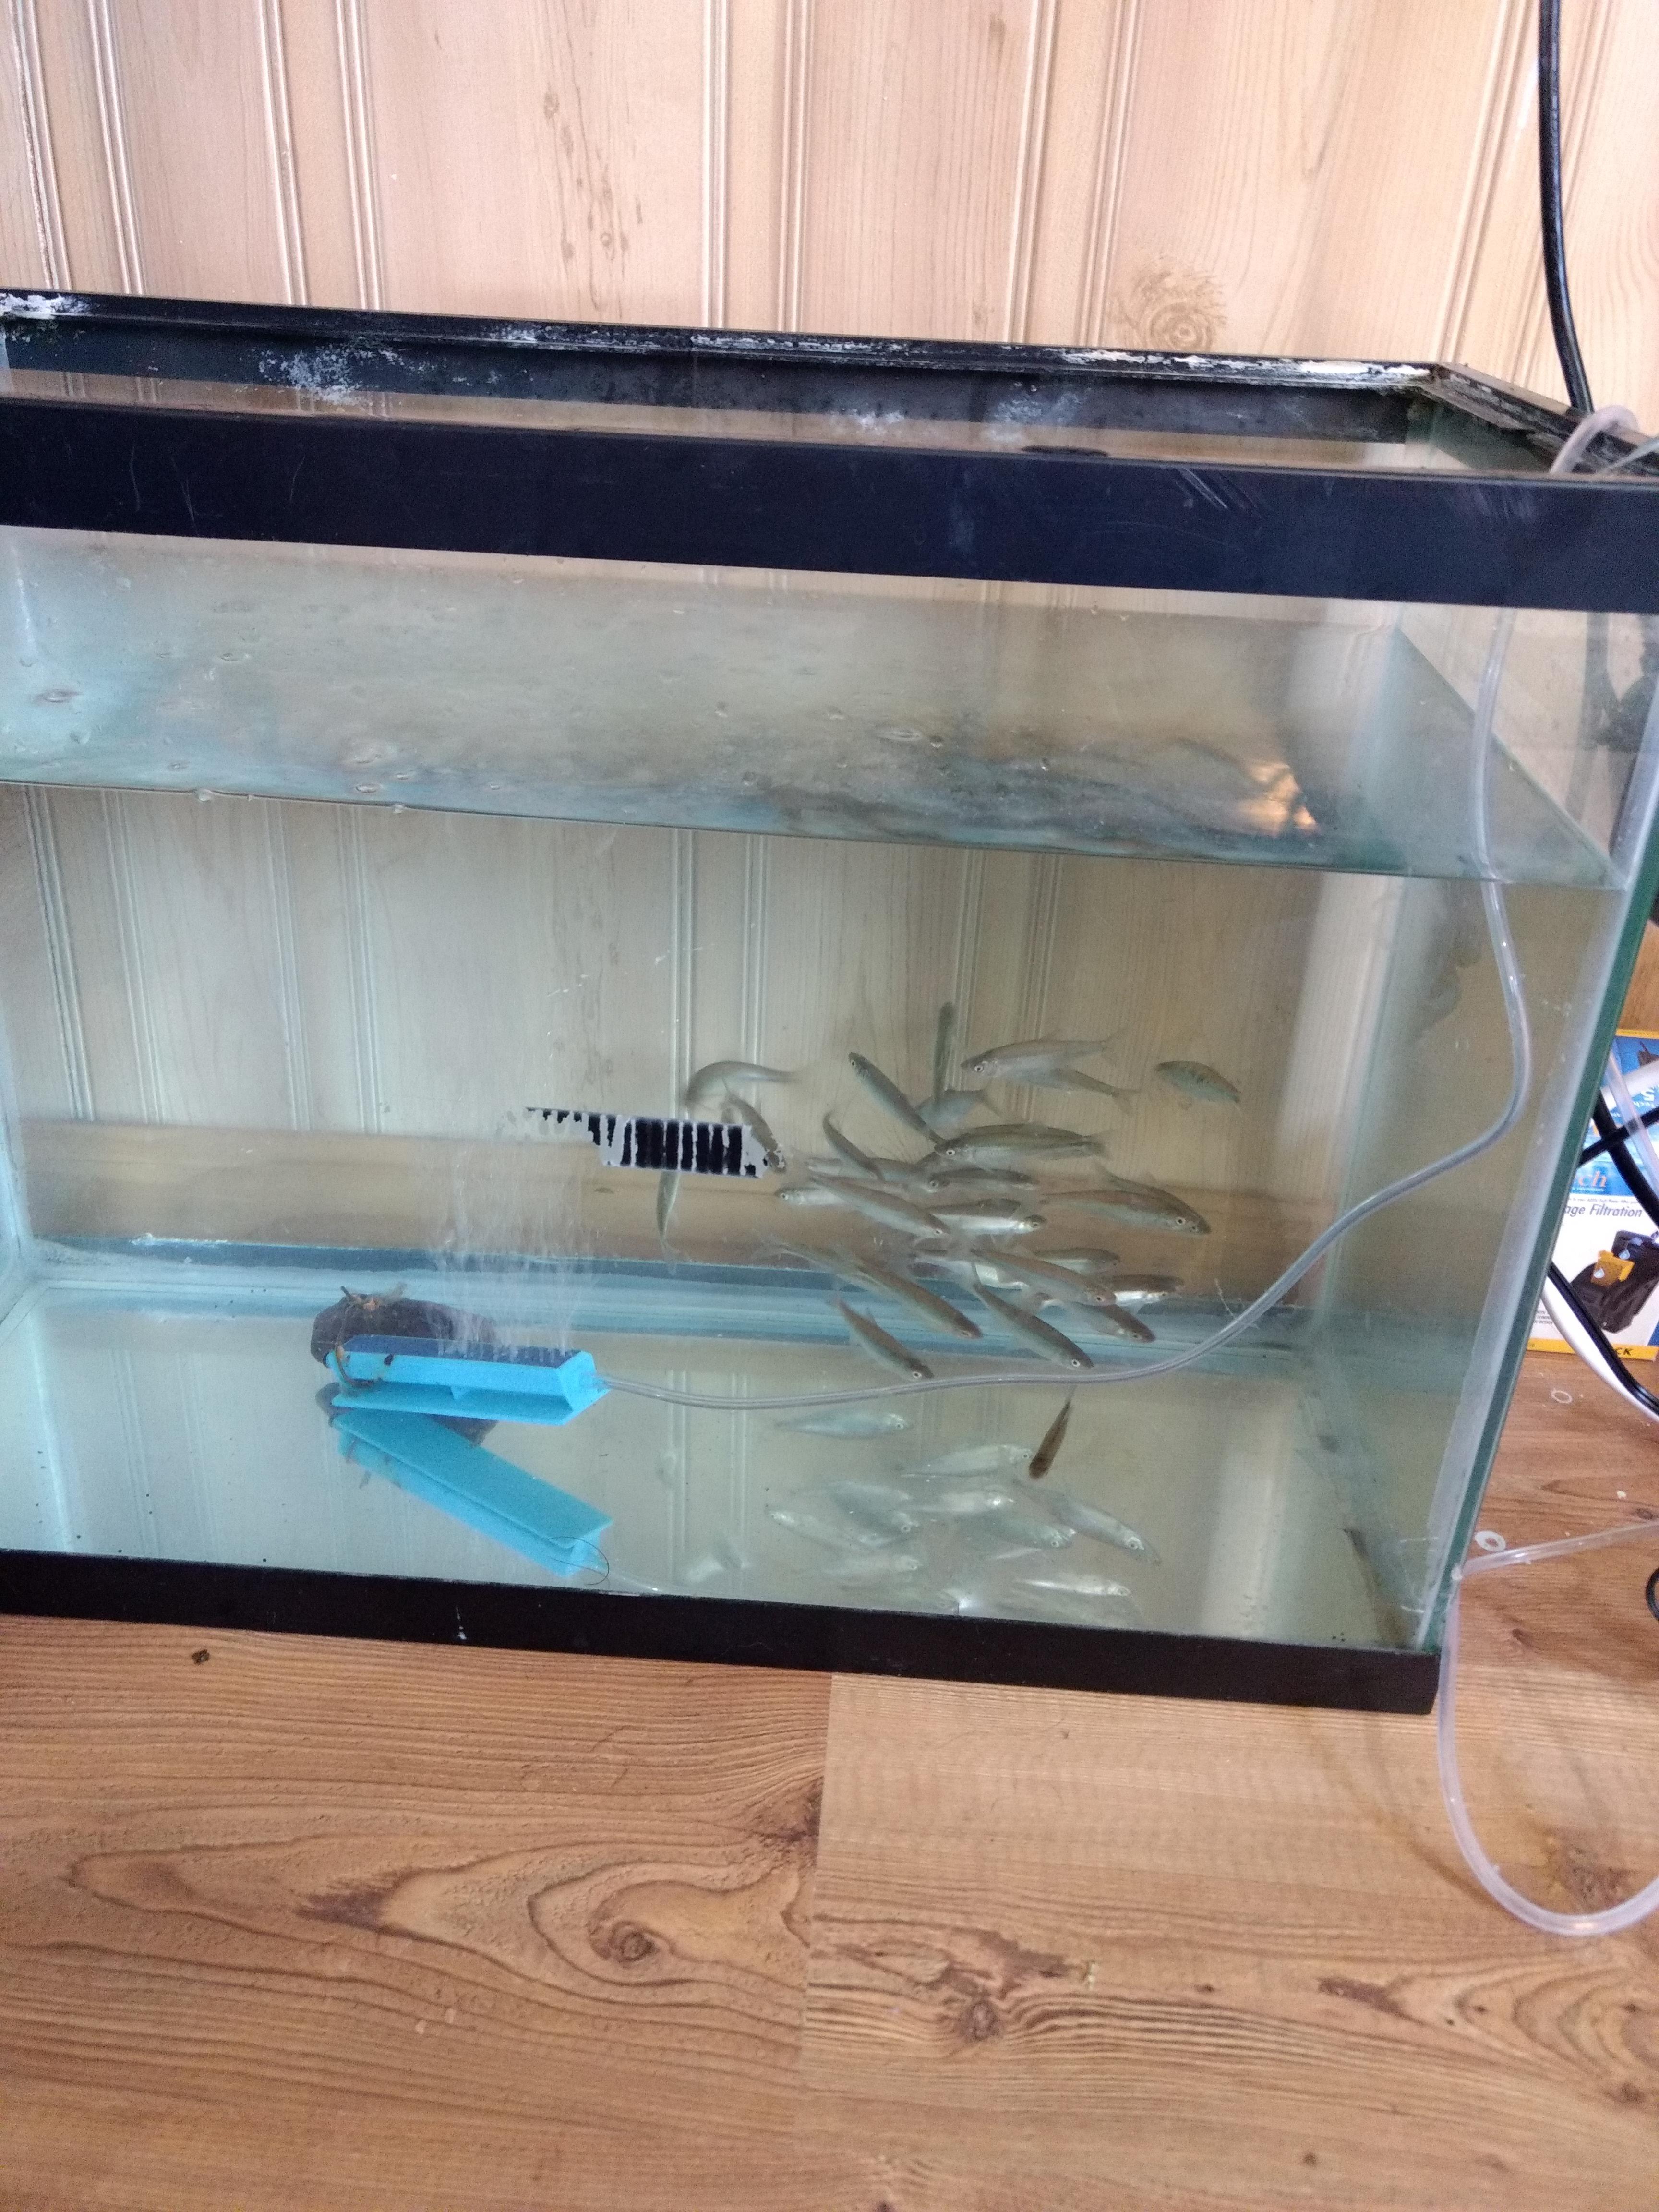 Turn a JKRate into an awesome Bait tank